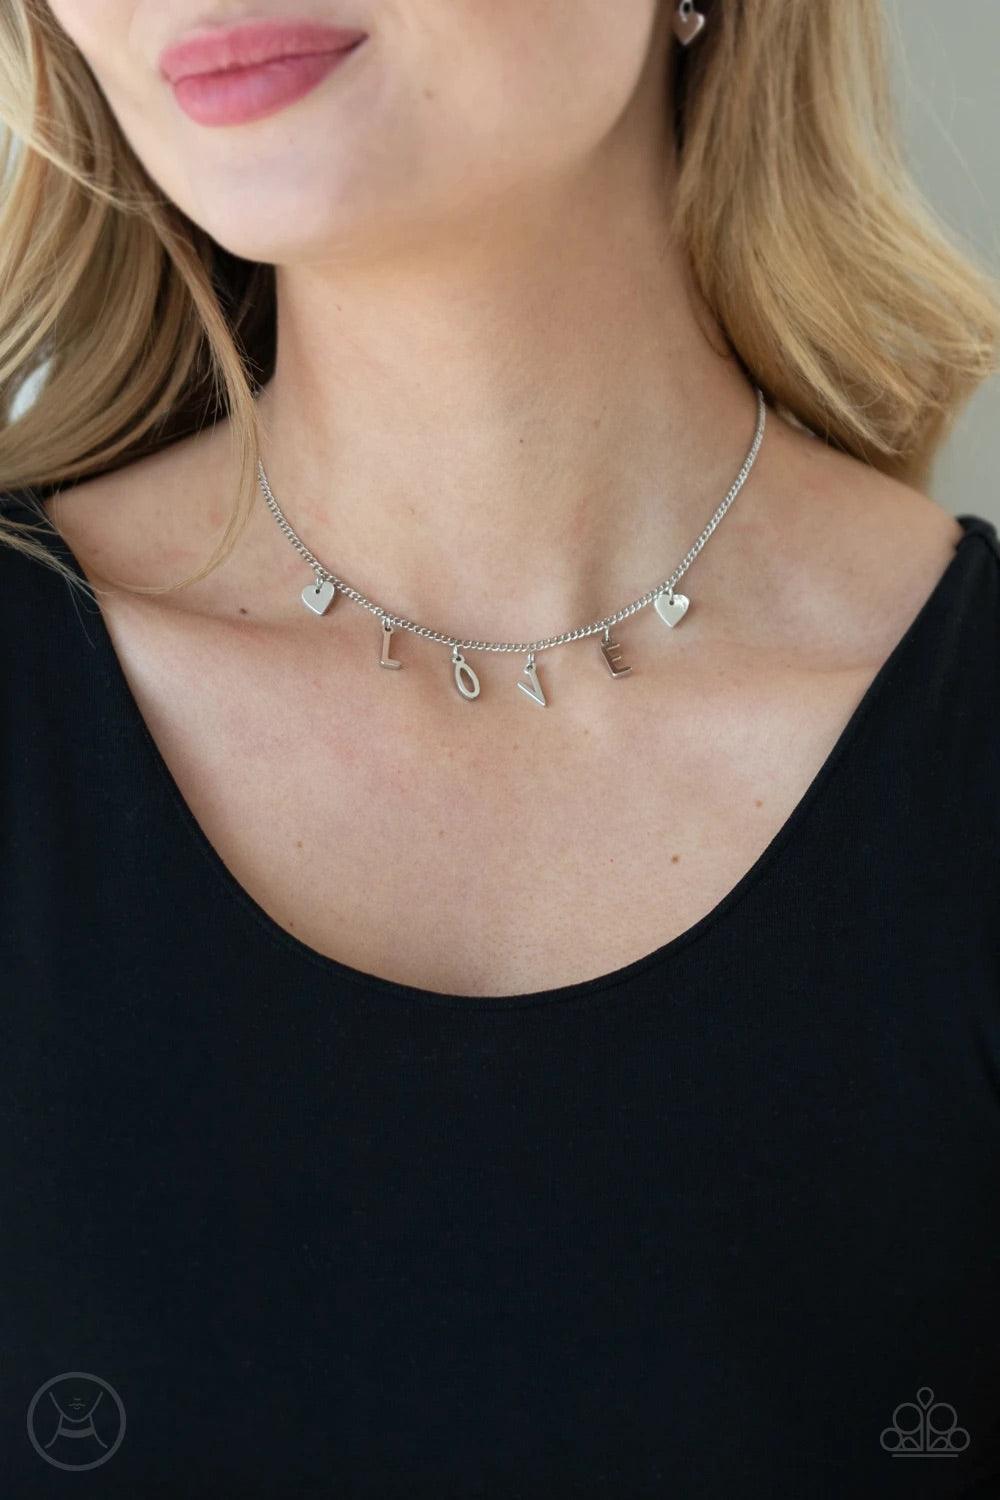 Paparazzi Accessories Love Conquers All - Silver Nestled between a pair of dainty silver hearts, dangling silver letter charms spell out the word, "LOVE," creating a flirty fringe around the neck. Features an adjustable clasp closure. Sold as one individu